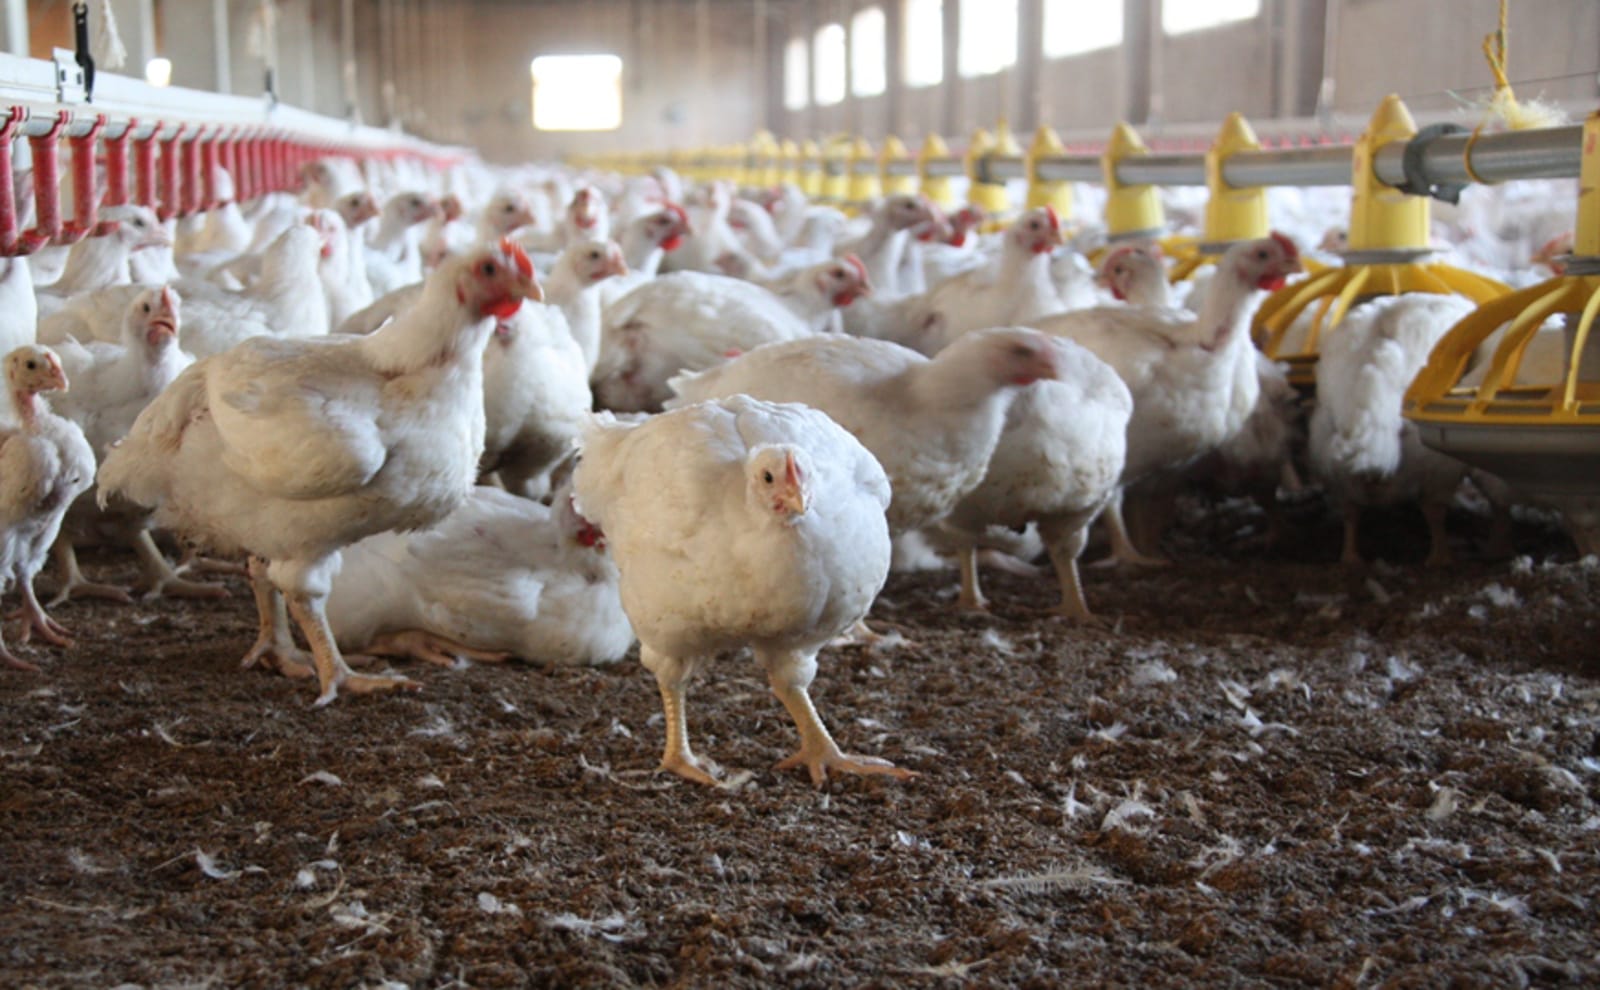 Why the Animal Agriculture Industry Needs More Than Good Samaritans to Make a Change